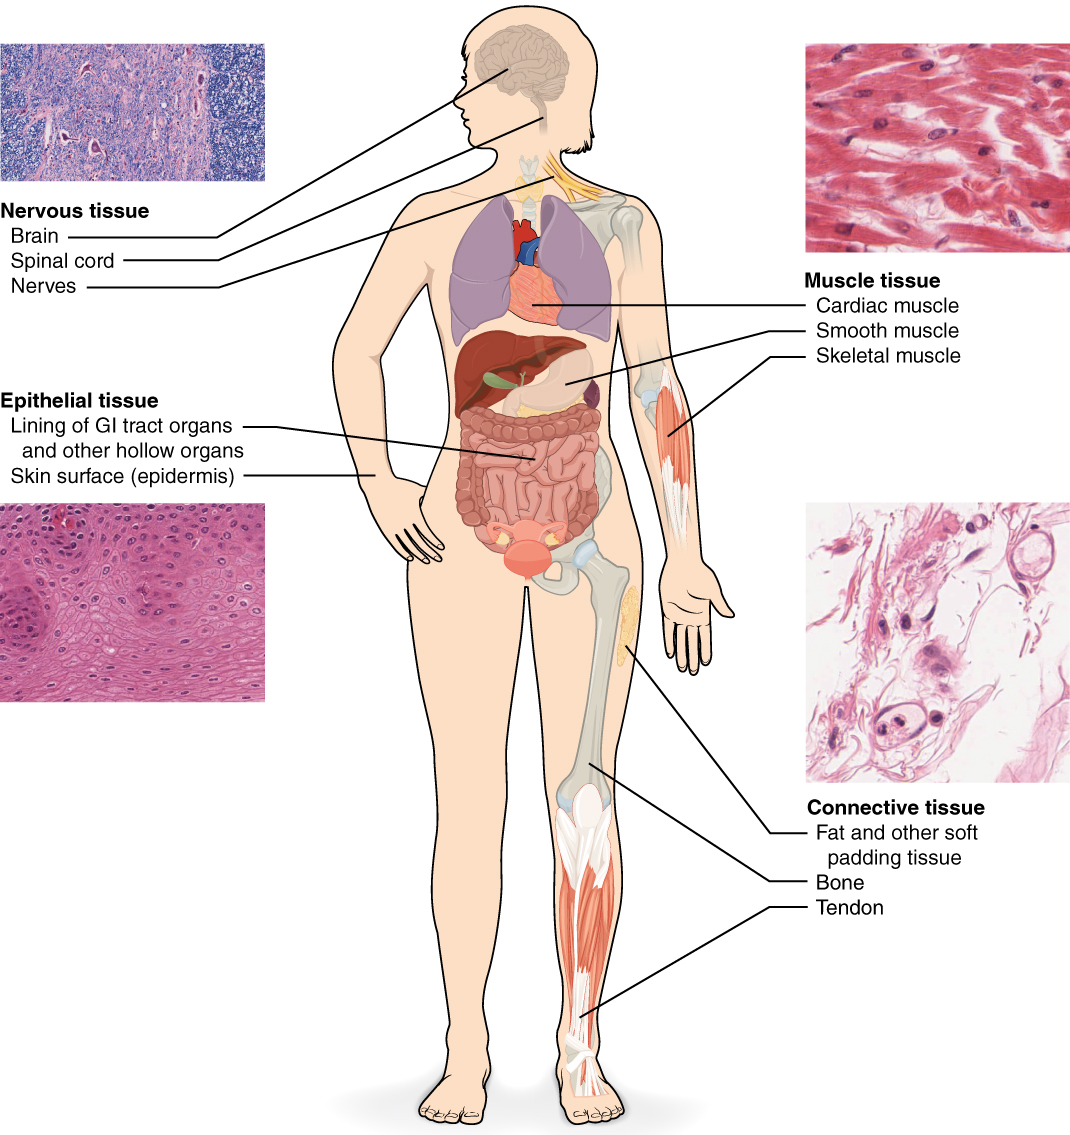 Human body with locations of four different tissue types - described in text.